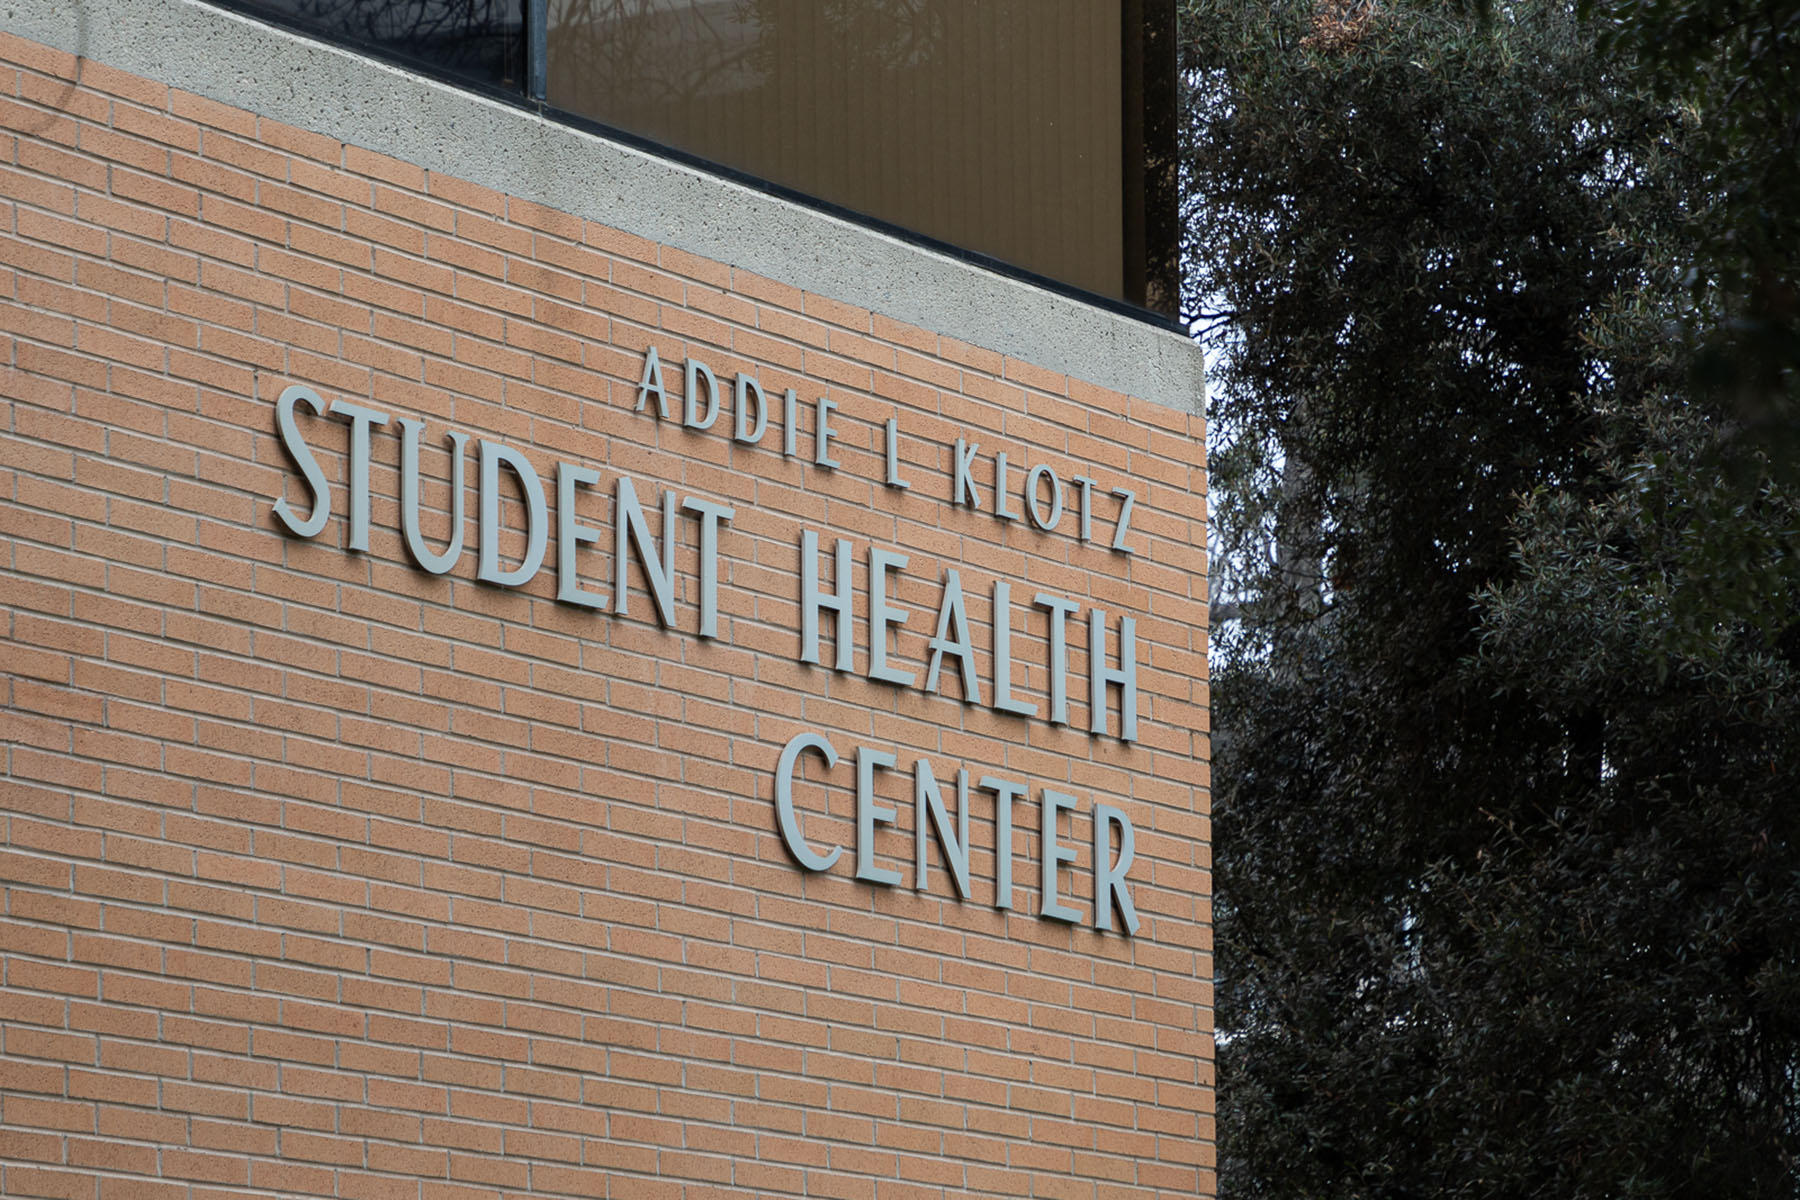 A brick wall with metal lettering that reads "Addie L. Klotz Student Health Center."